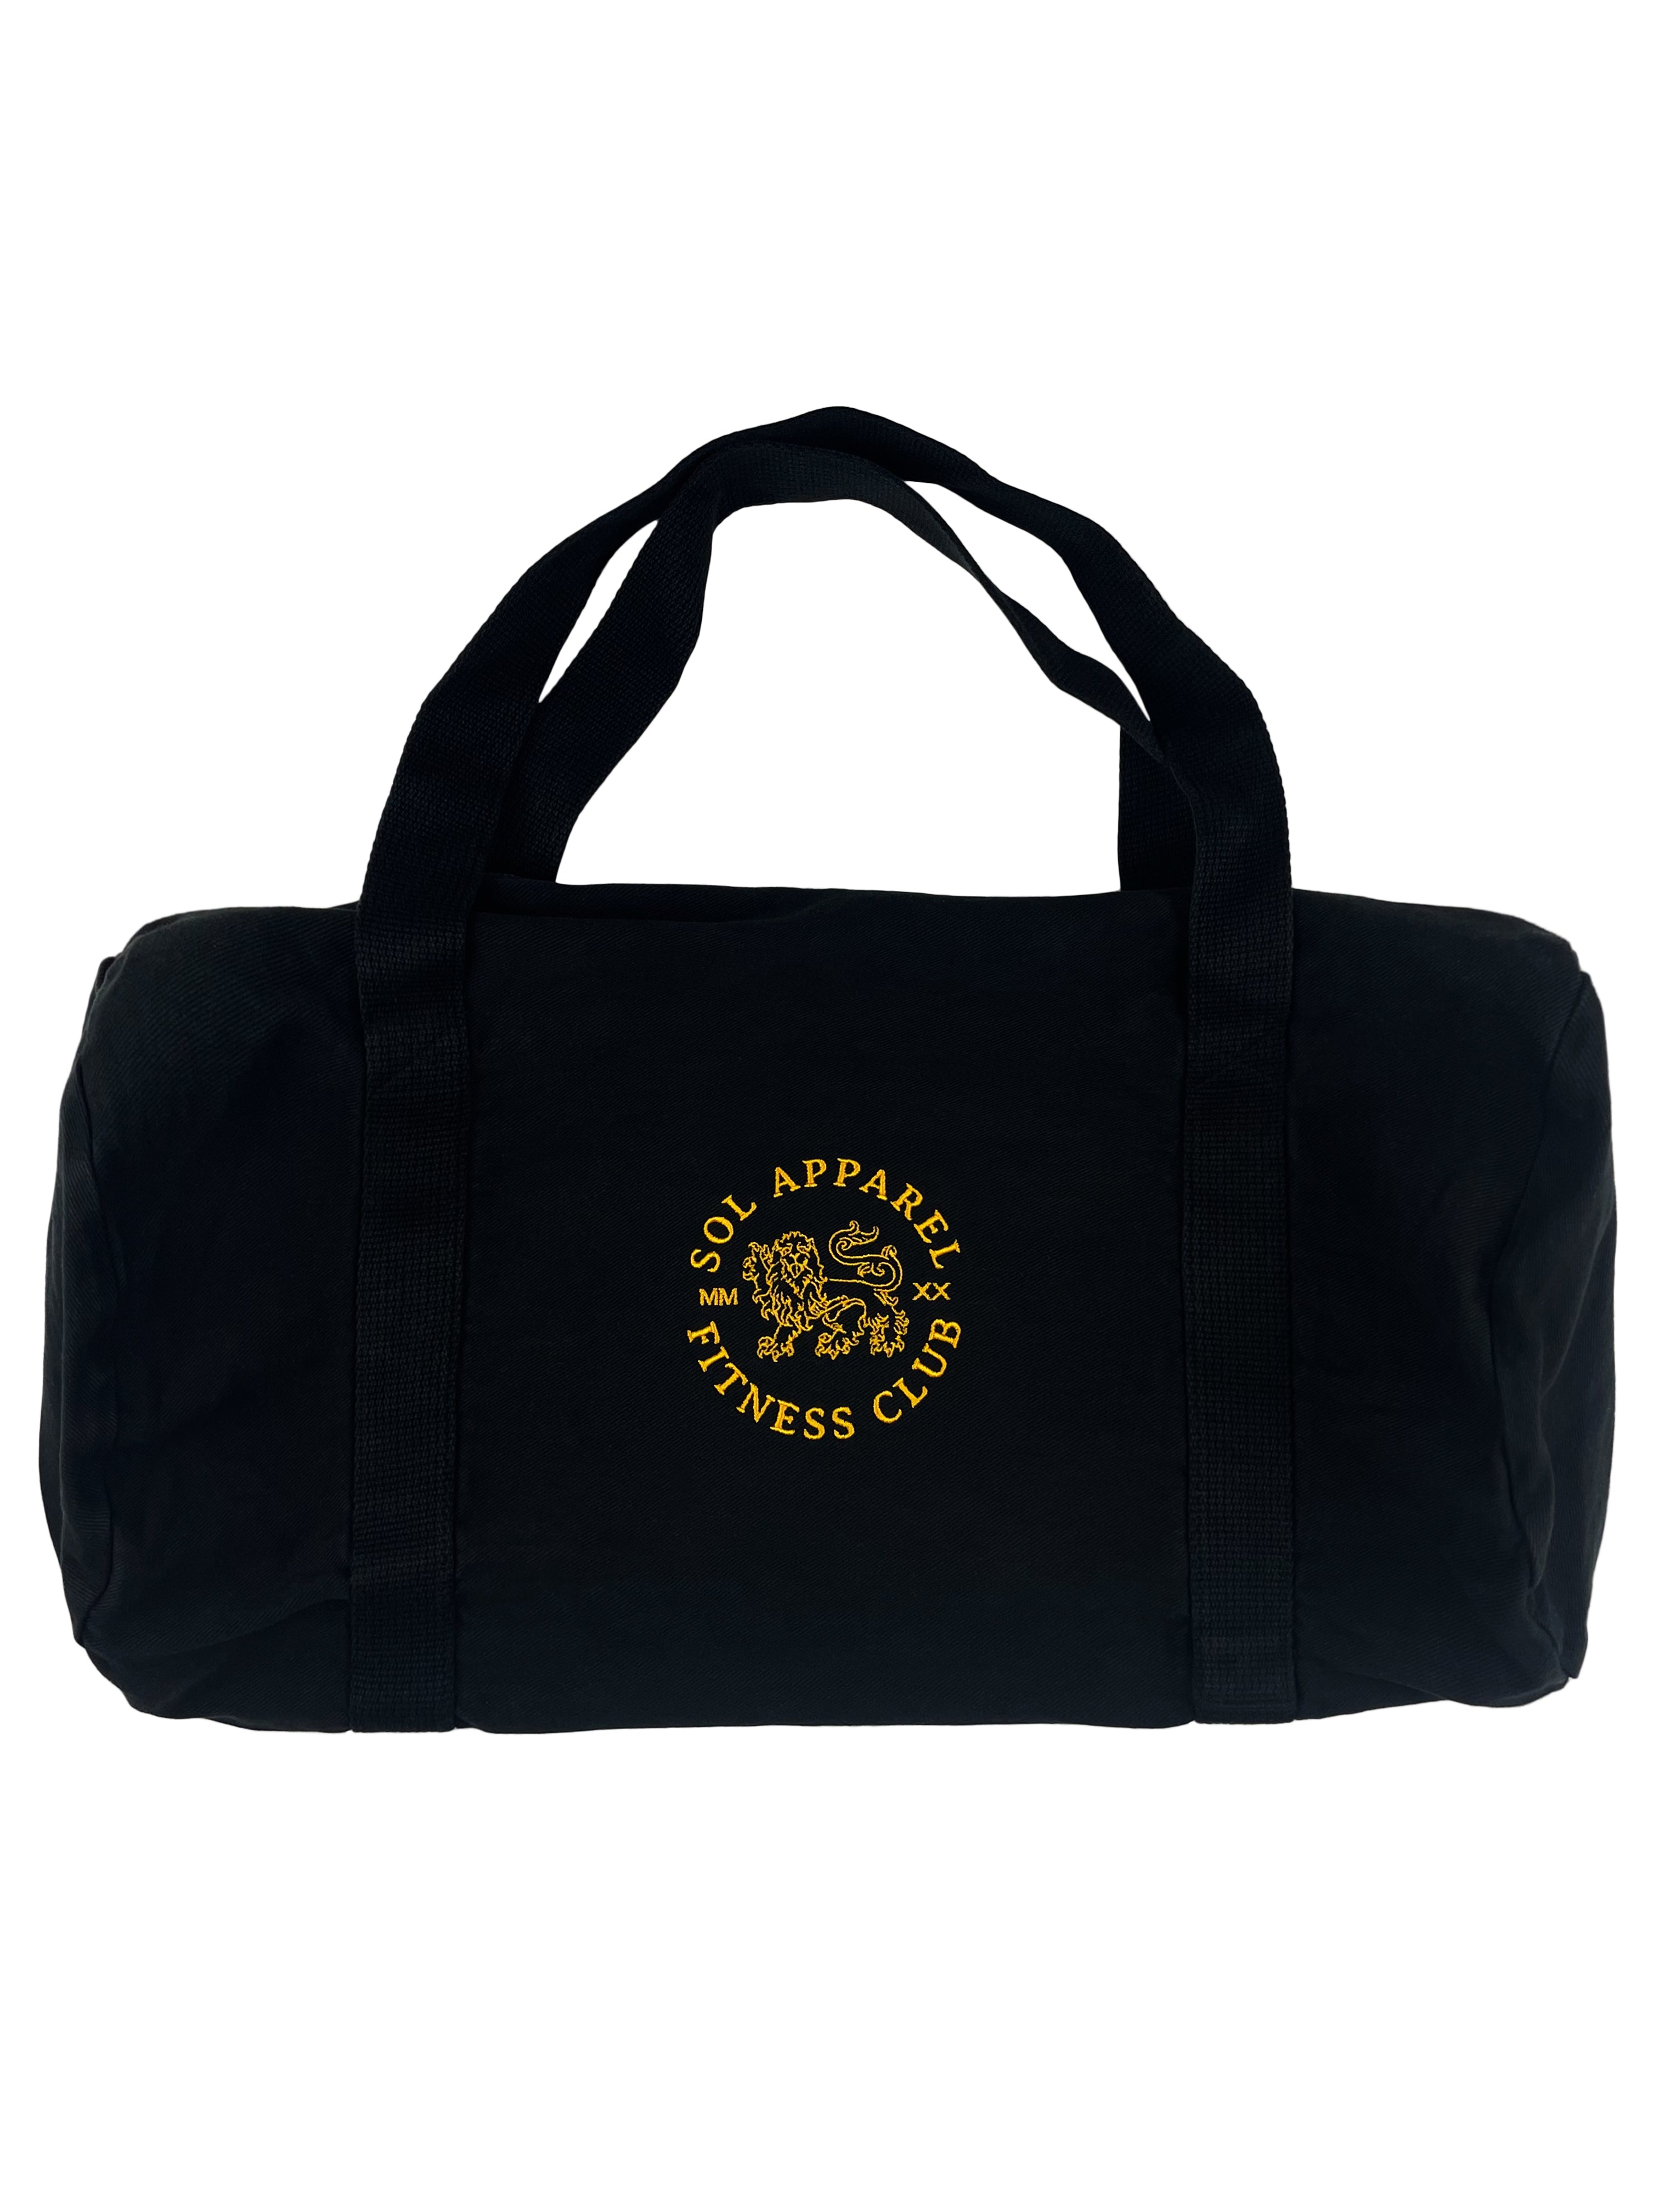 black cotton gym duffel bag with golden embroidered logo of a lion and the words sol apparel fitness club